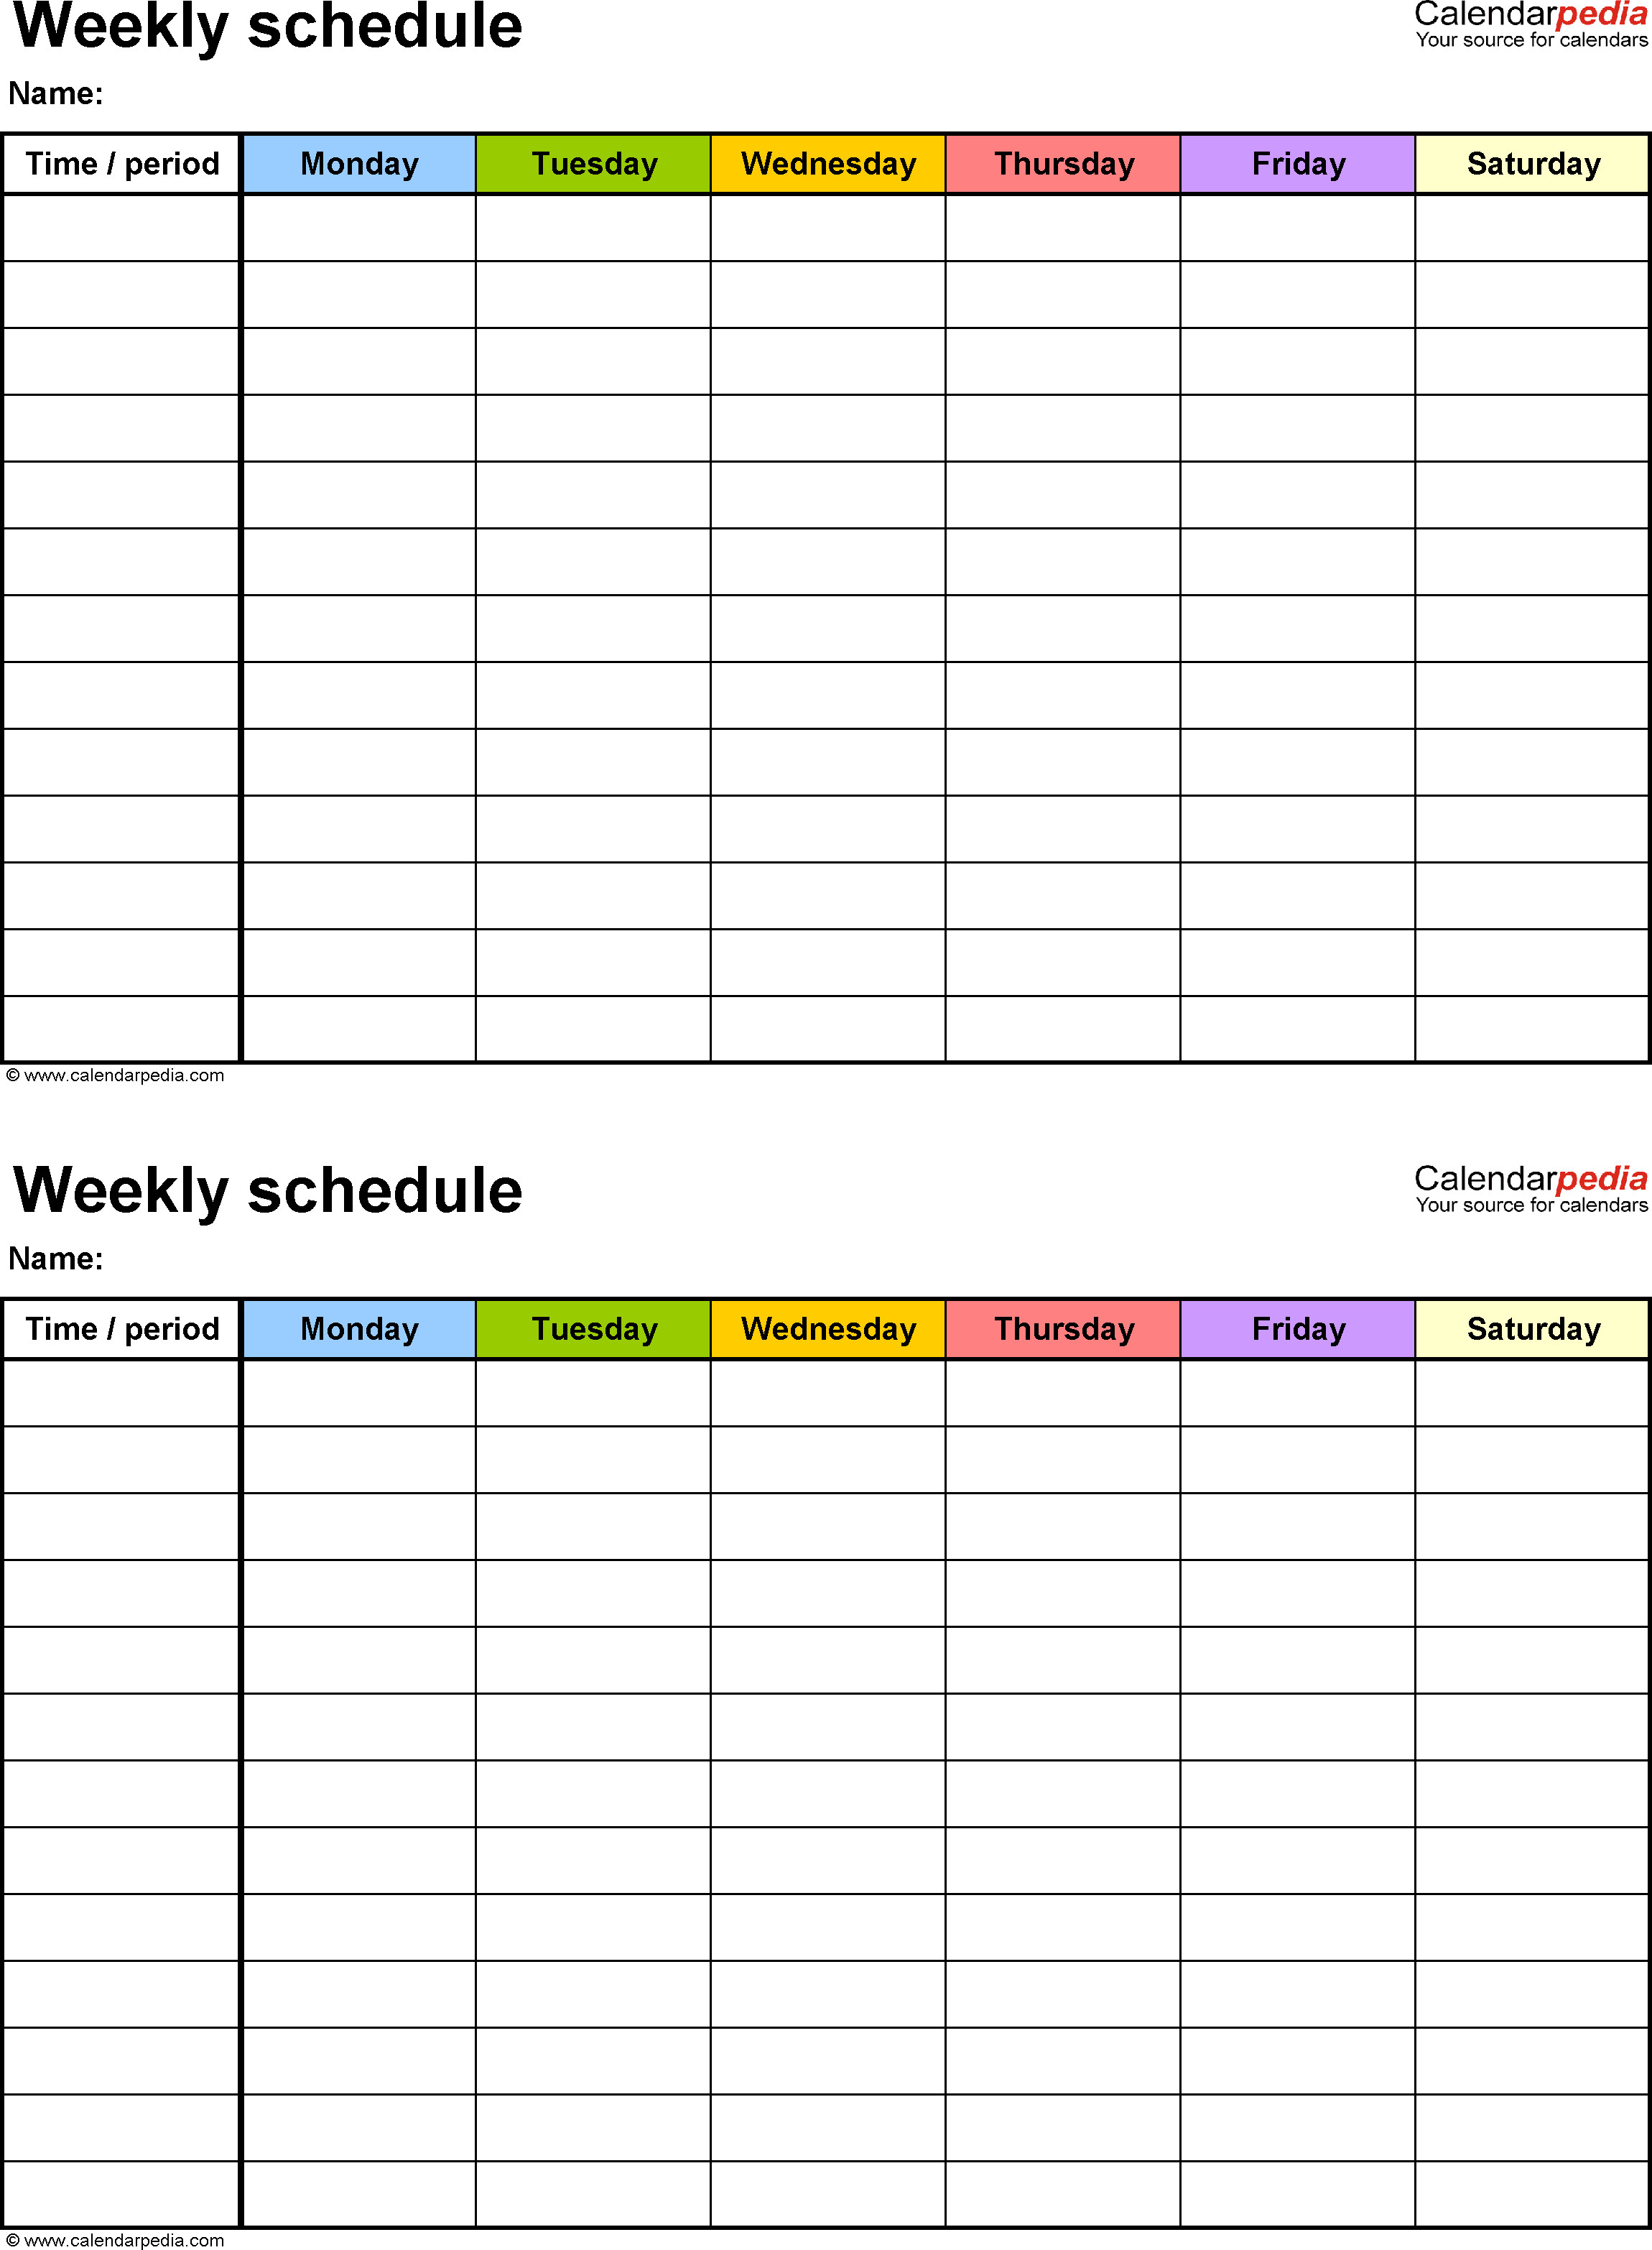 30 Weekly Schedule Planner Template | Andaluzseattle